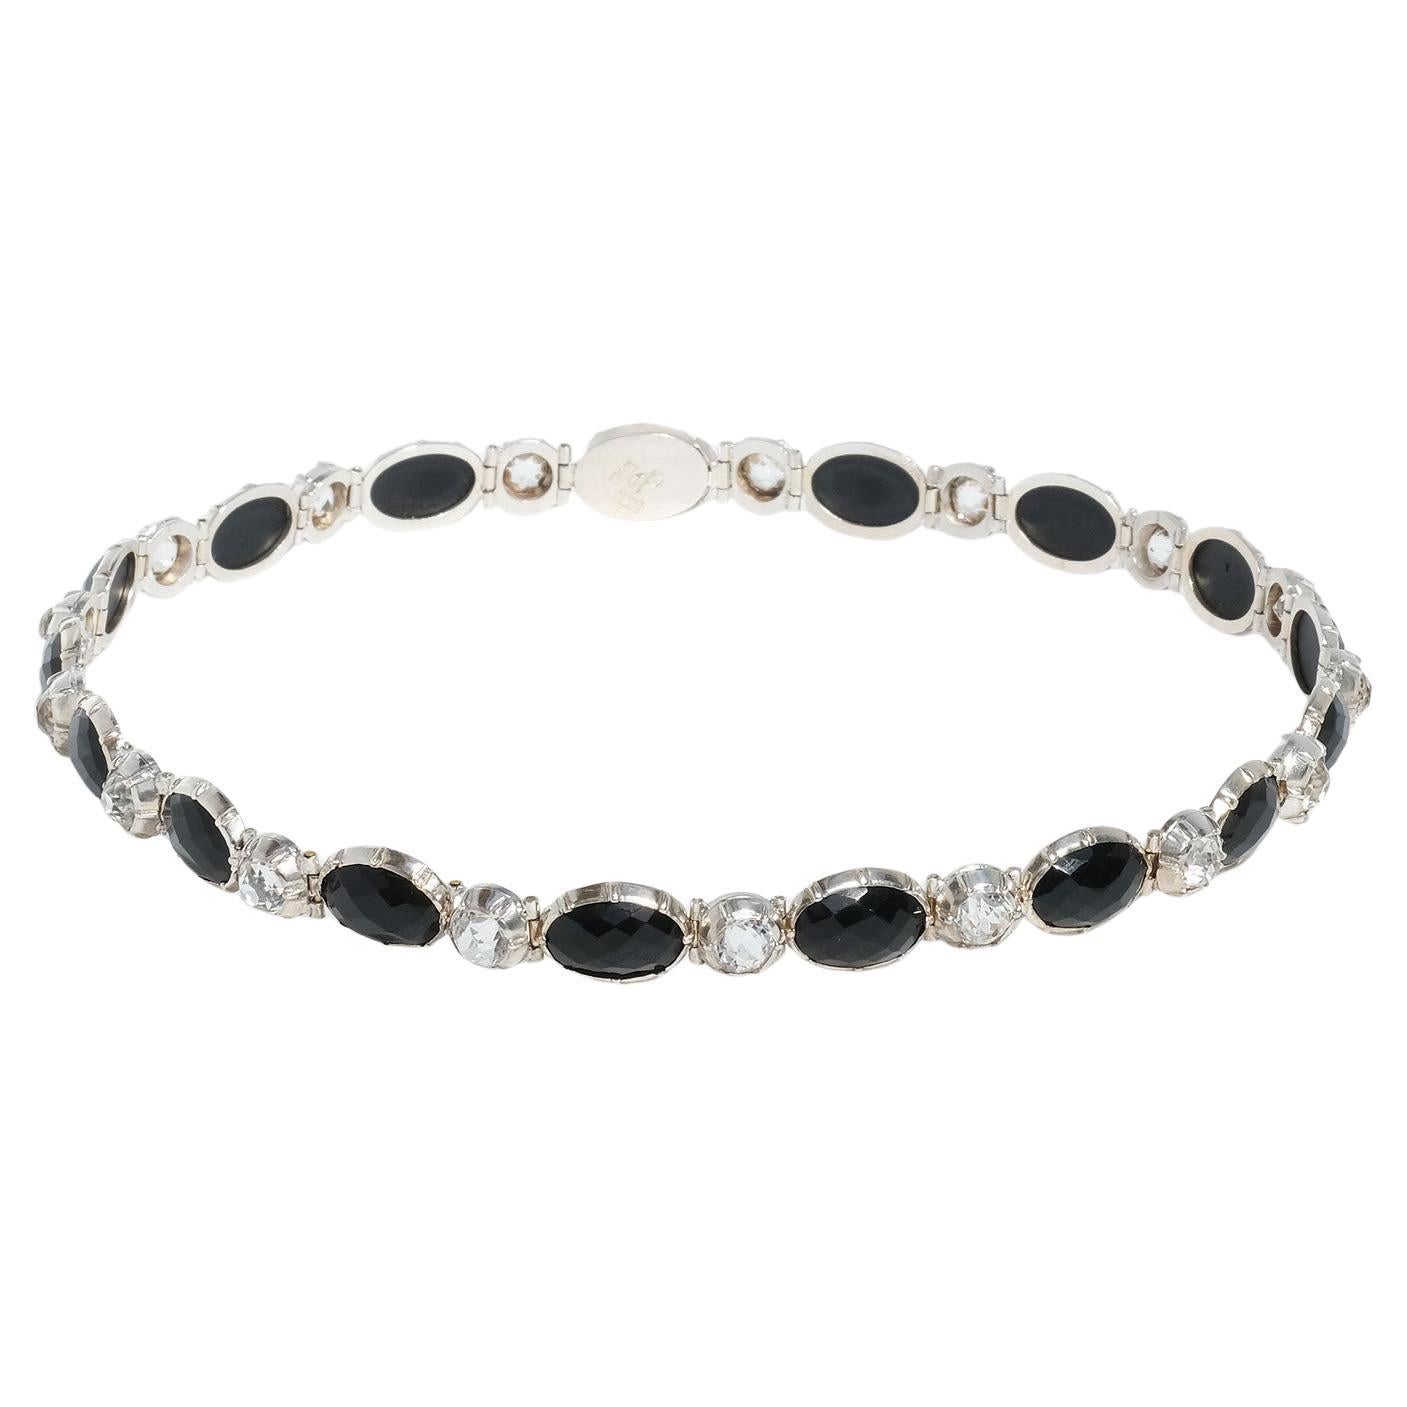 Antique Silver, Rock Crystal and Onyx Choker Necklace Made Year 1890 For Sale